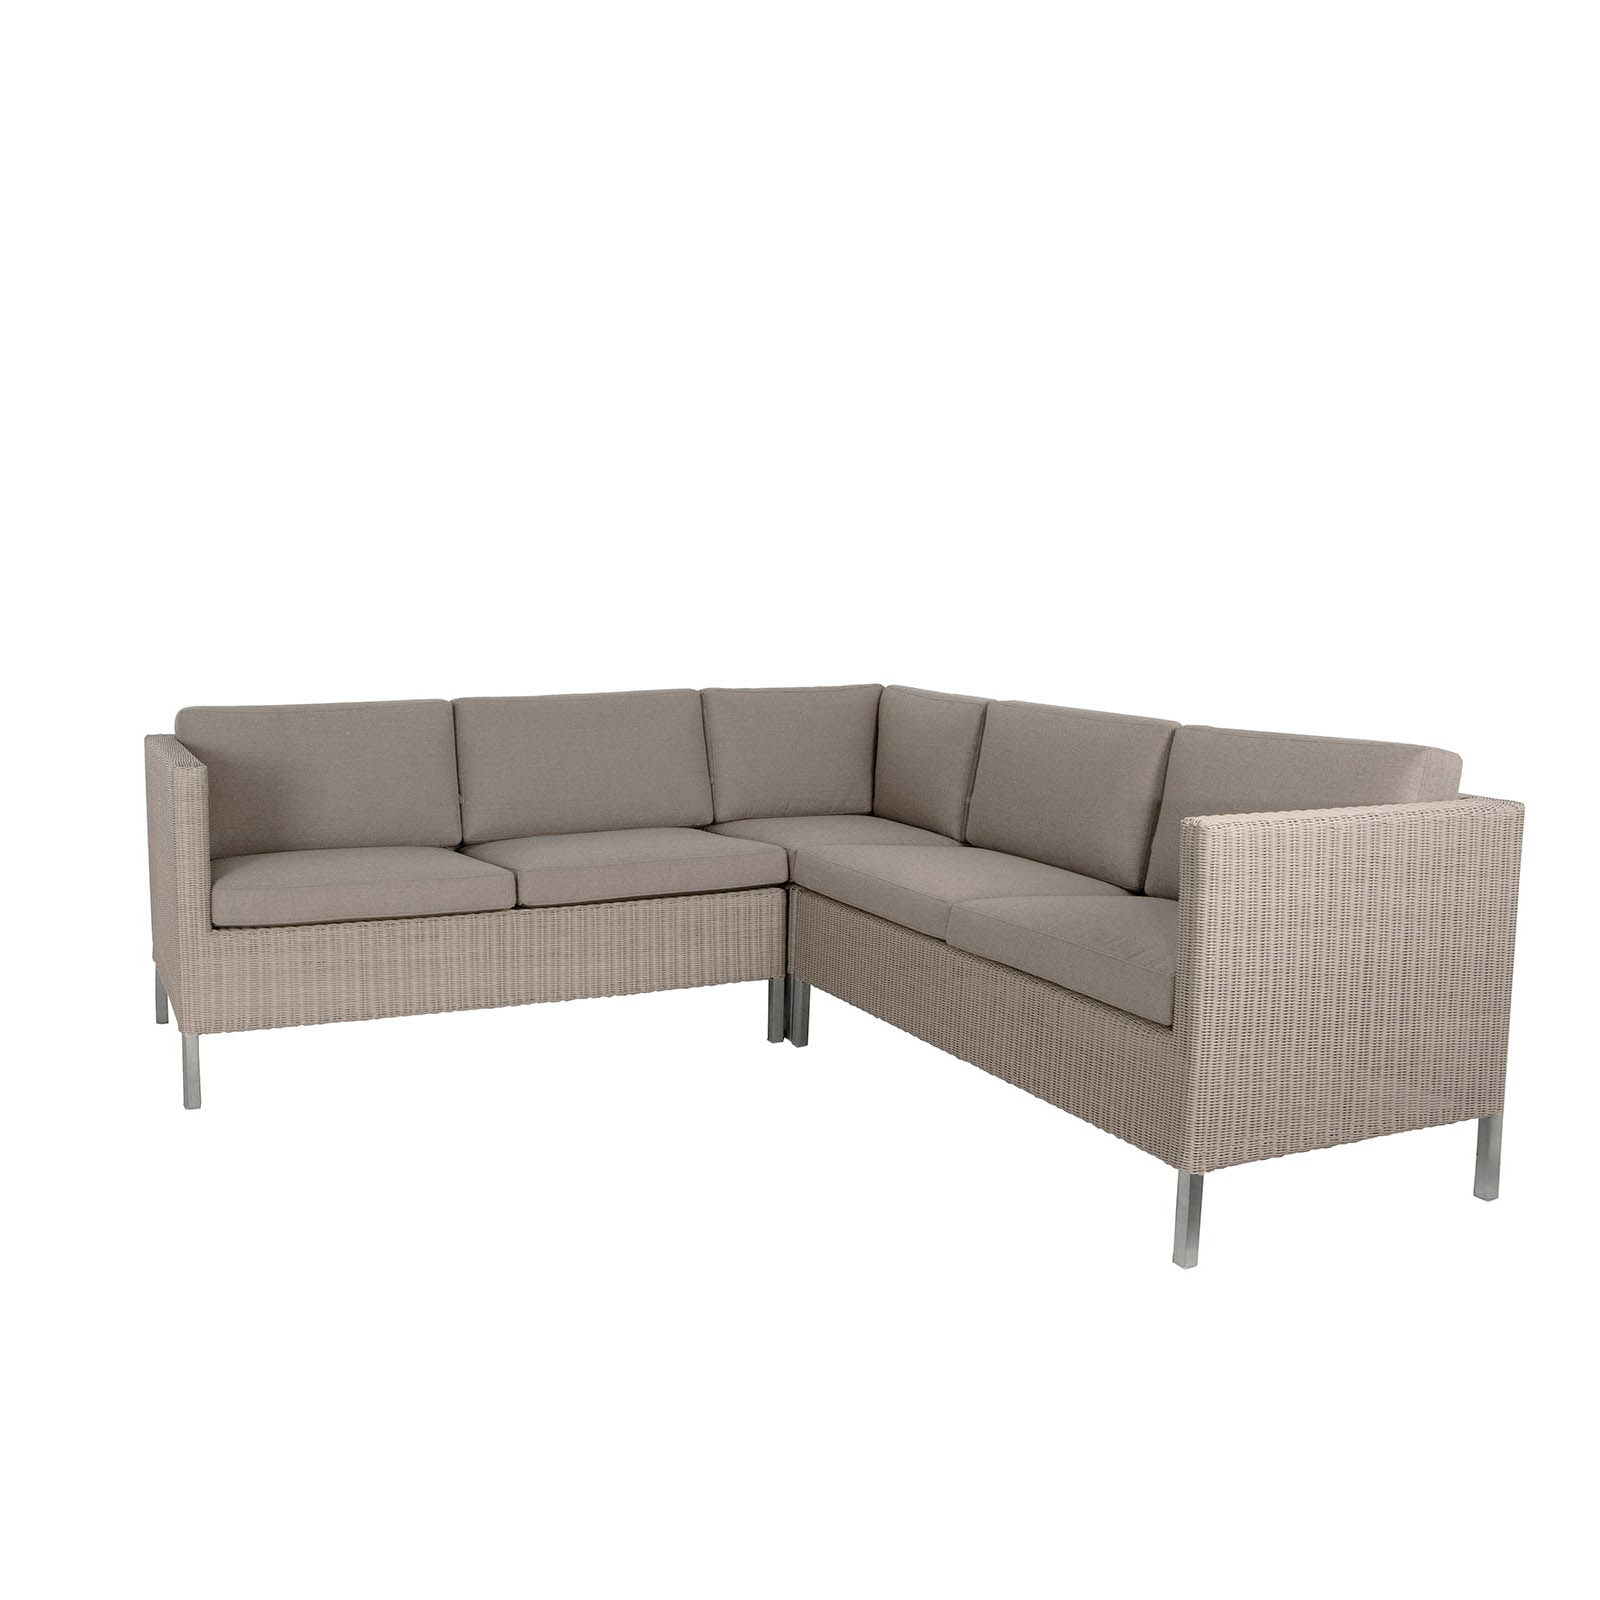 Connect Dining Lounge 20 aus Cane-line Weave in Taupe